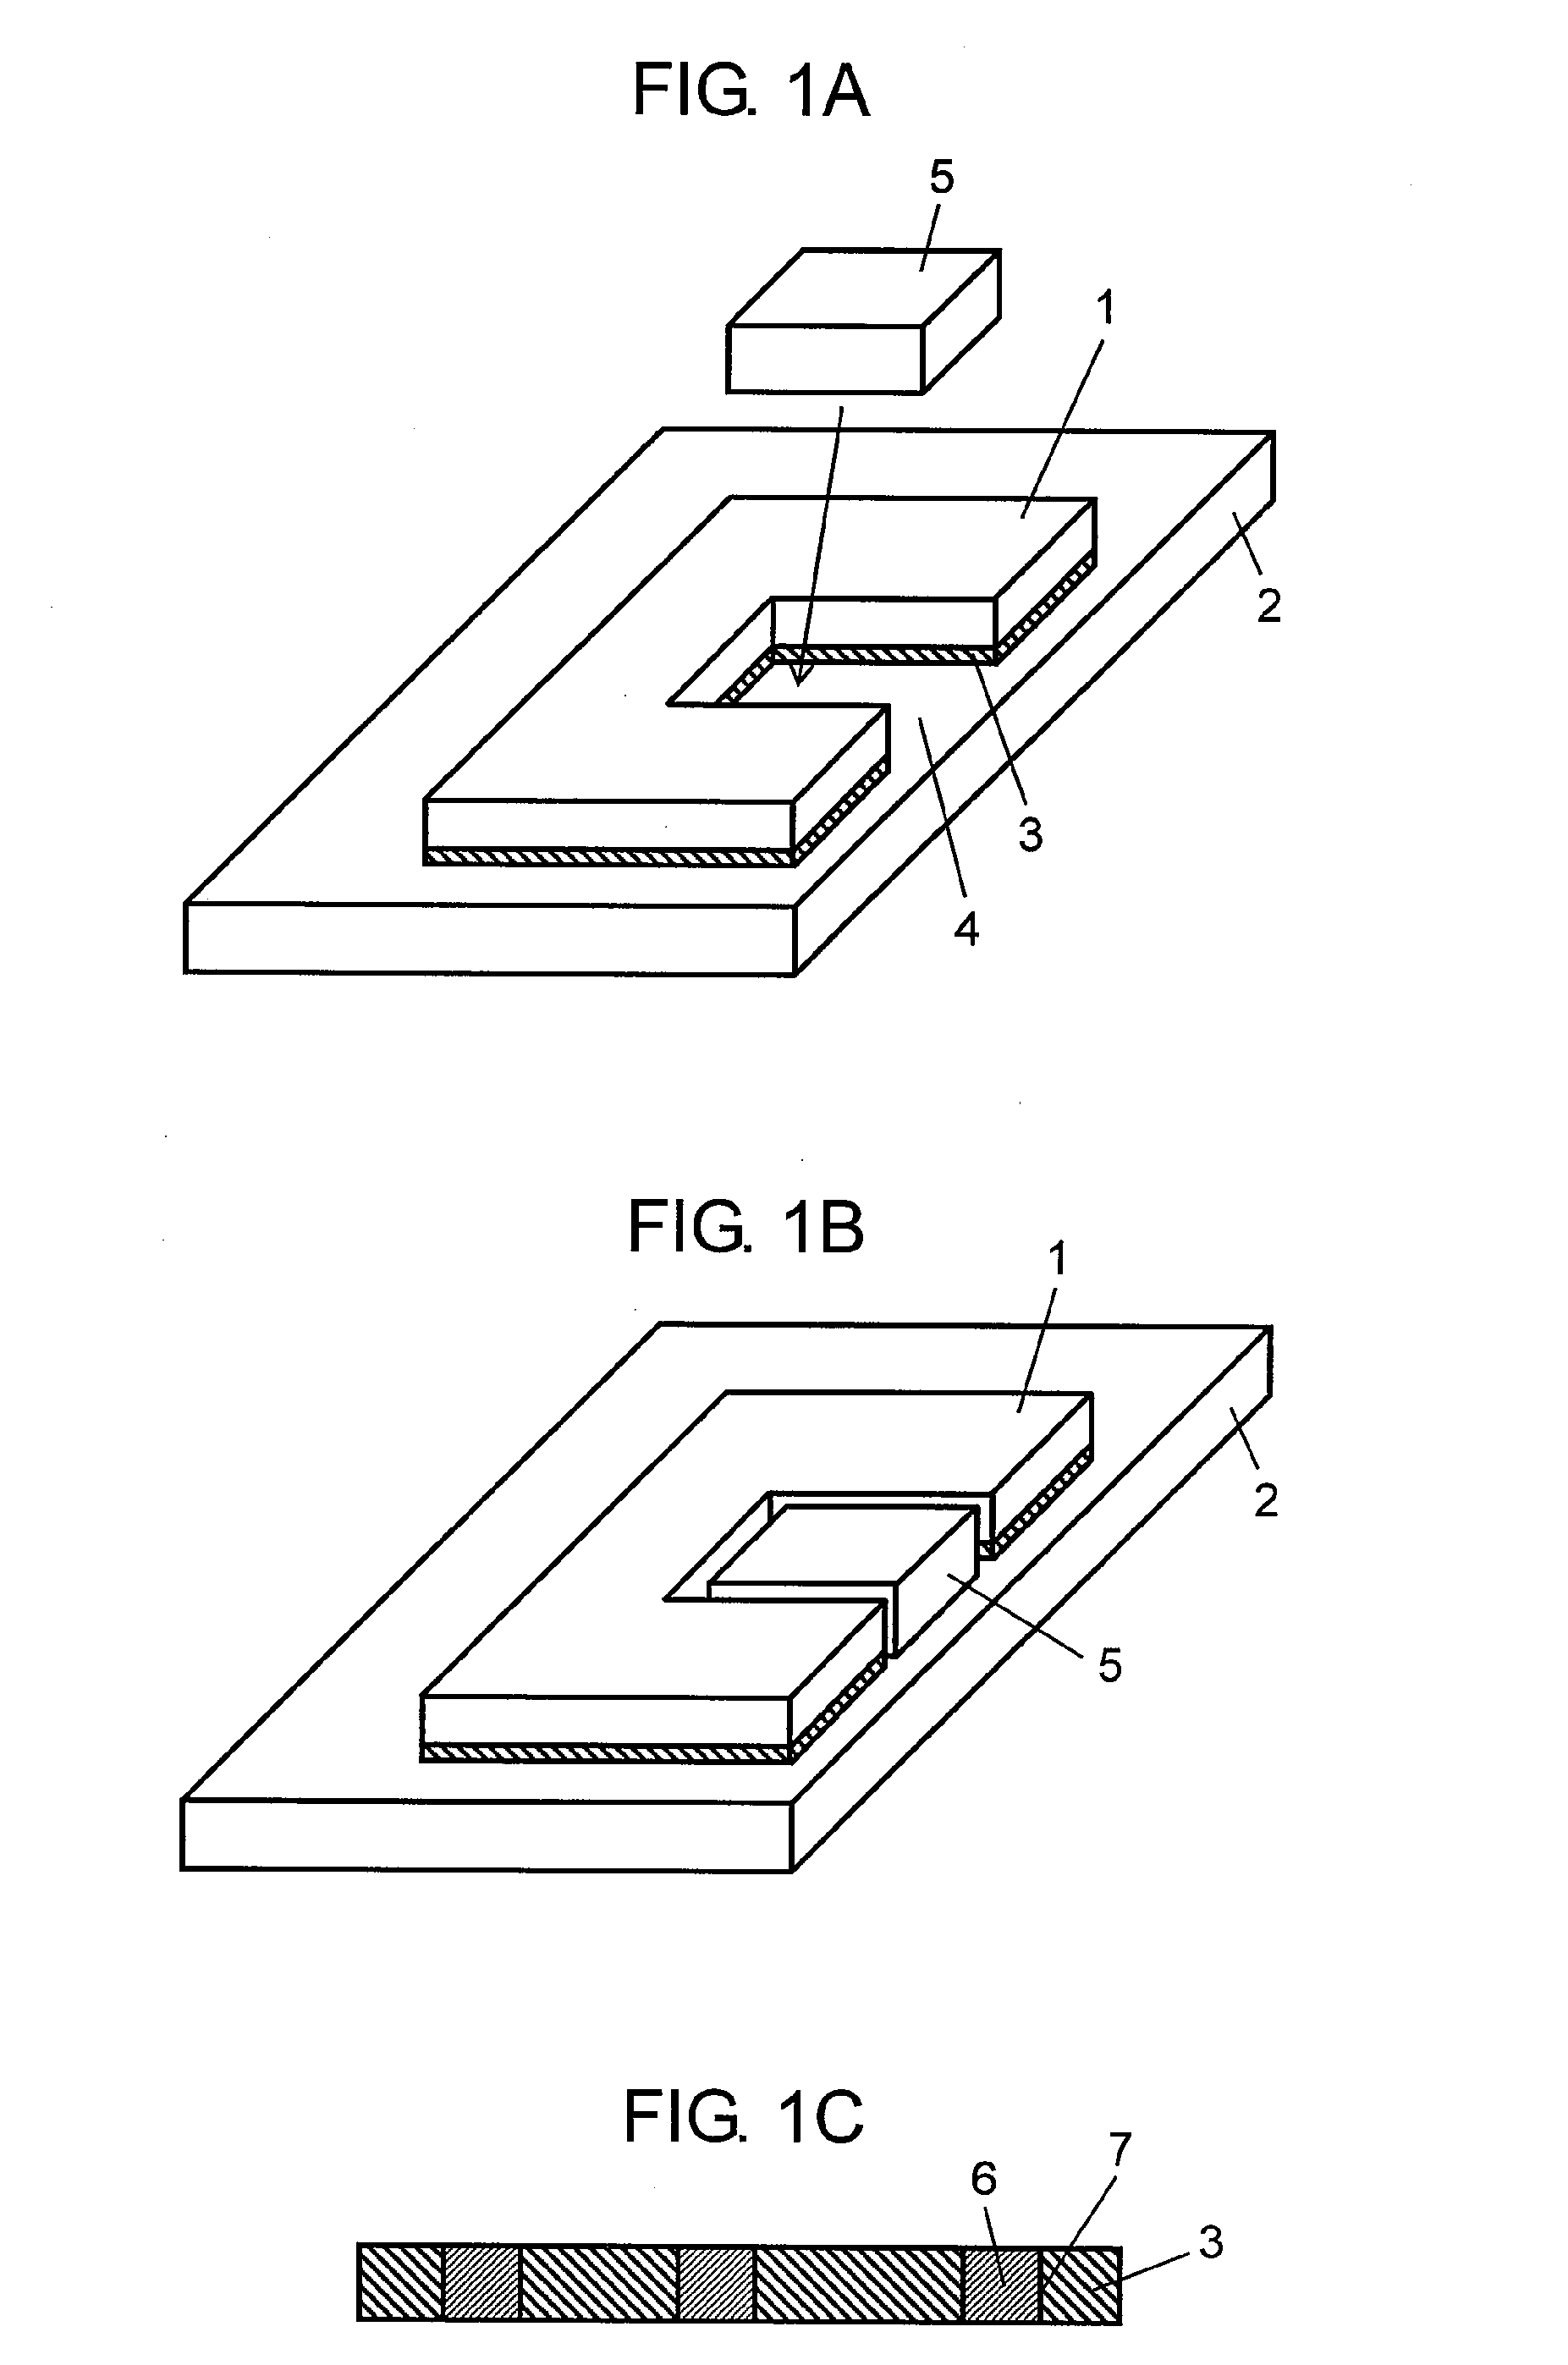 Solid printed circuit board and method of manufacturing the same